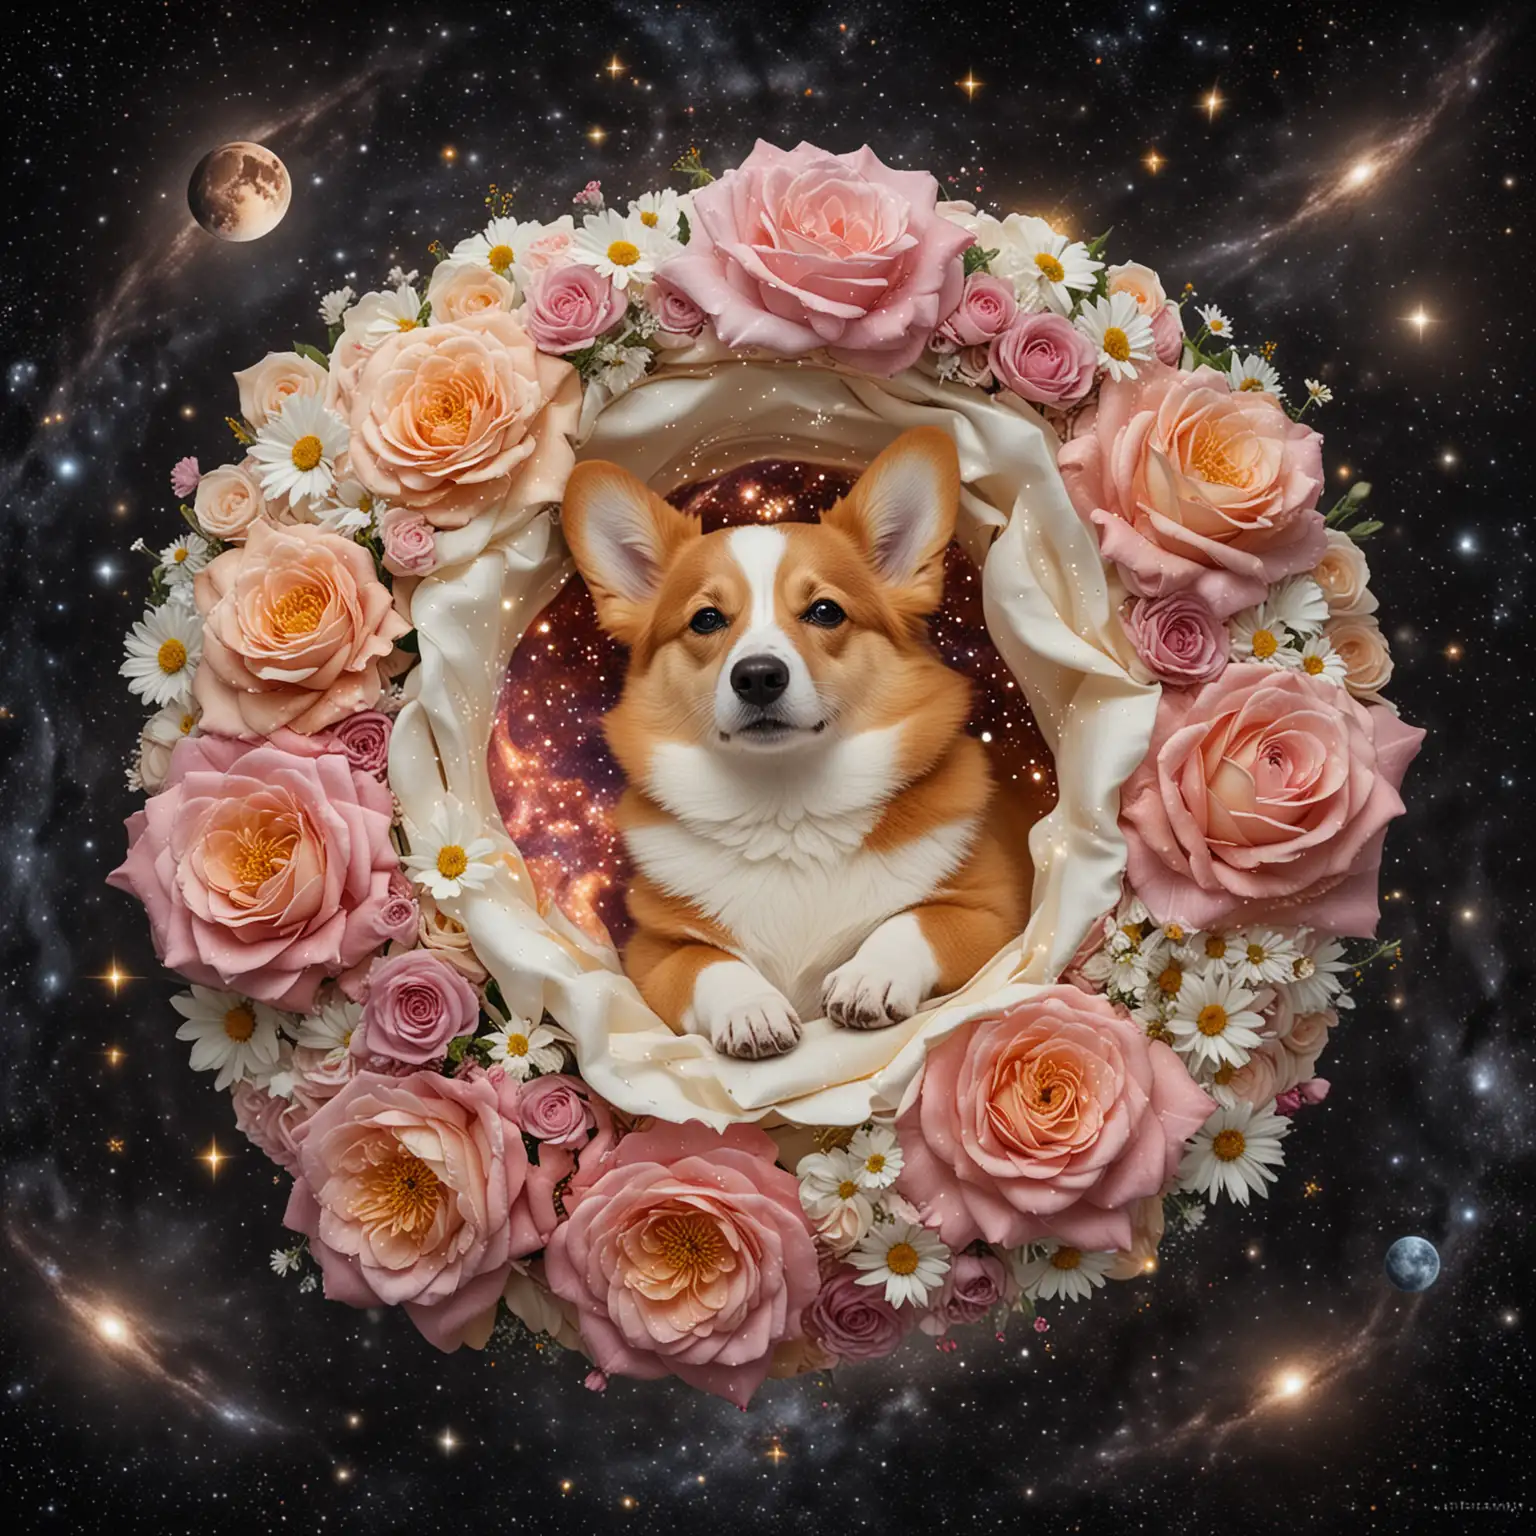 The sweet baby corgi curled up asleep in the  giant flower, floating in space with constellations and ringed planets, cosmic winds swirl around the white petals of the rose